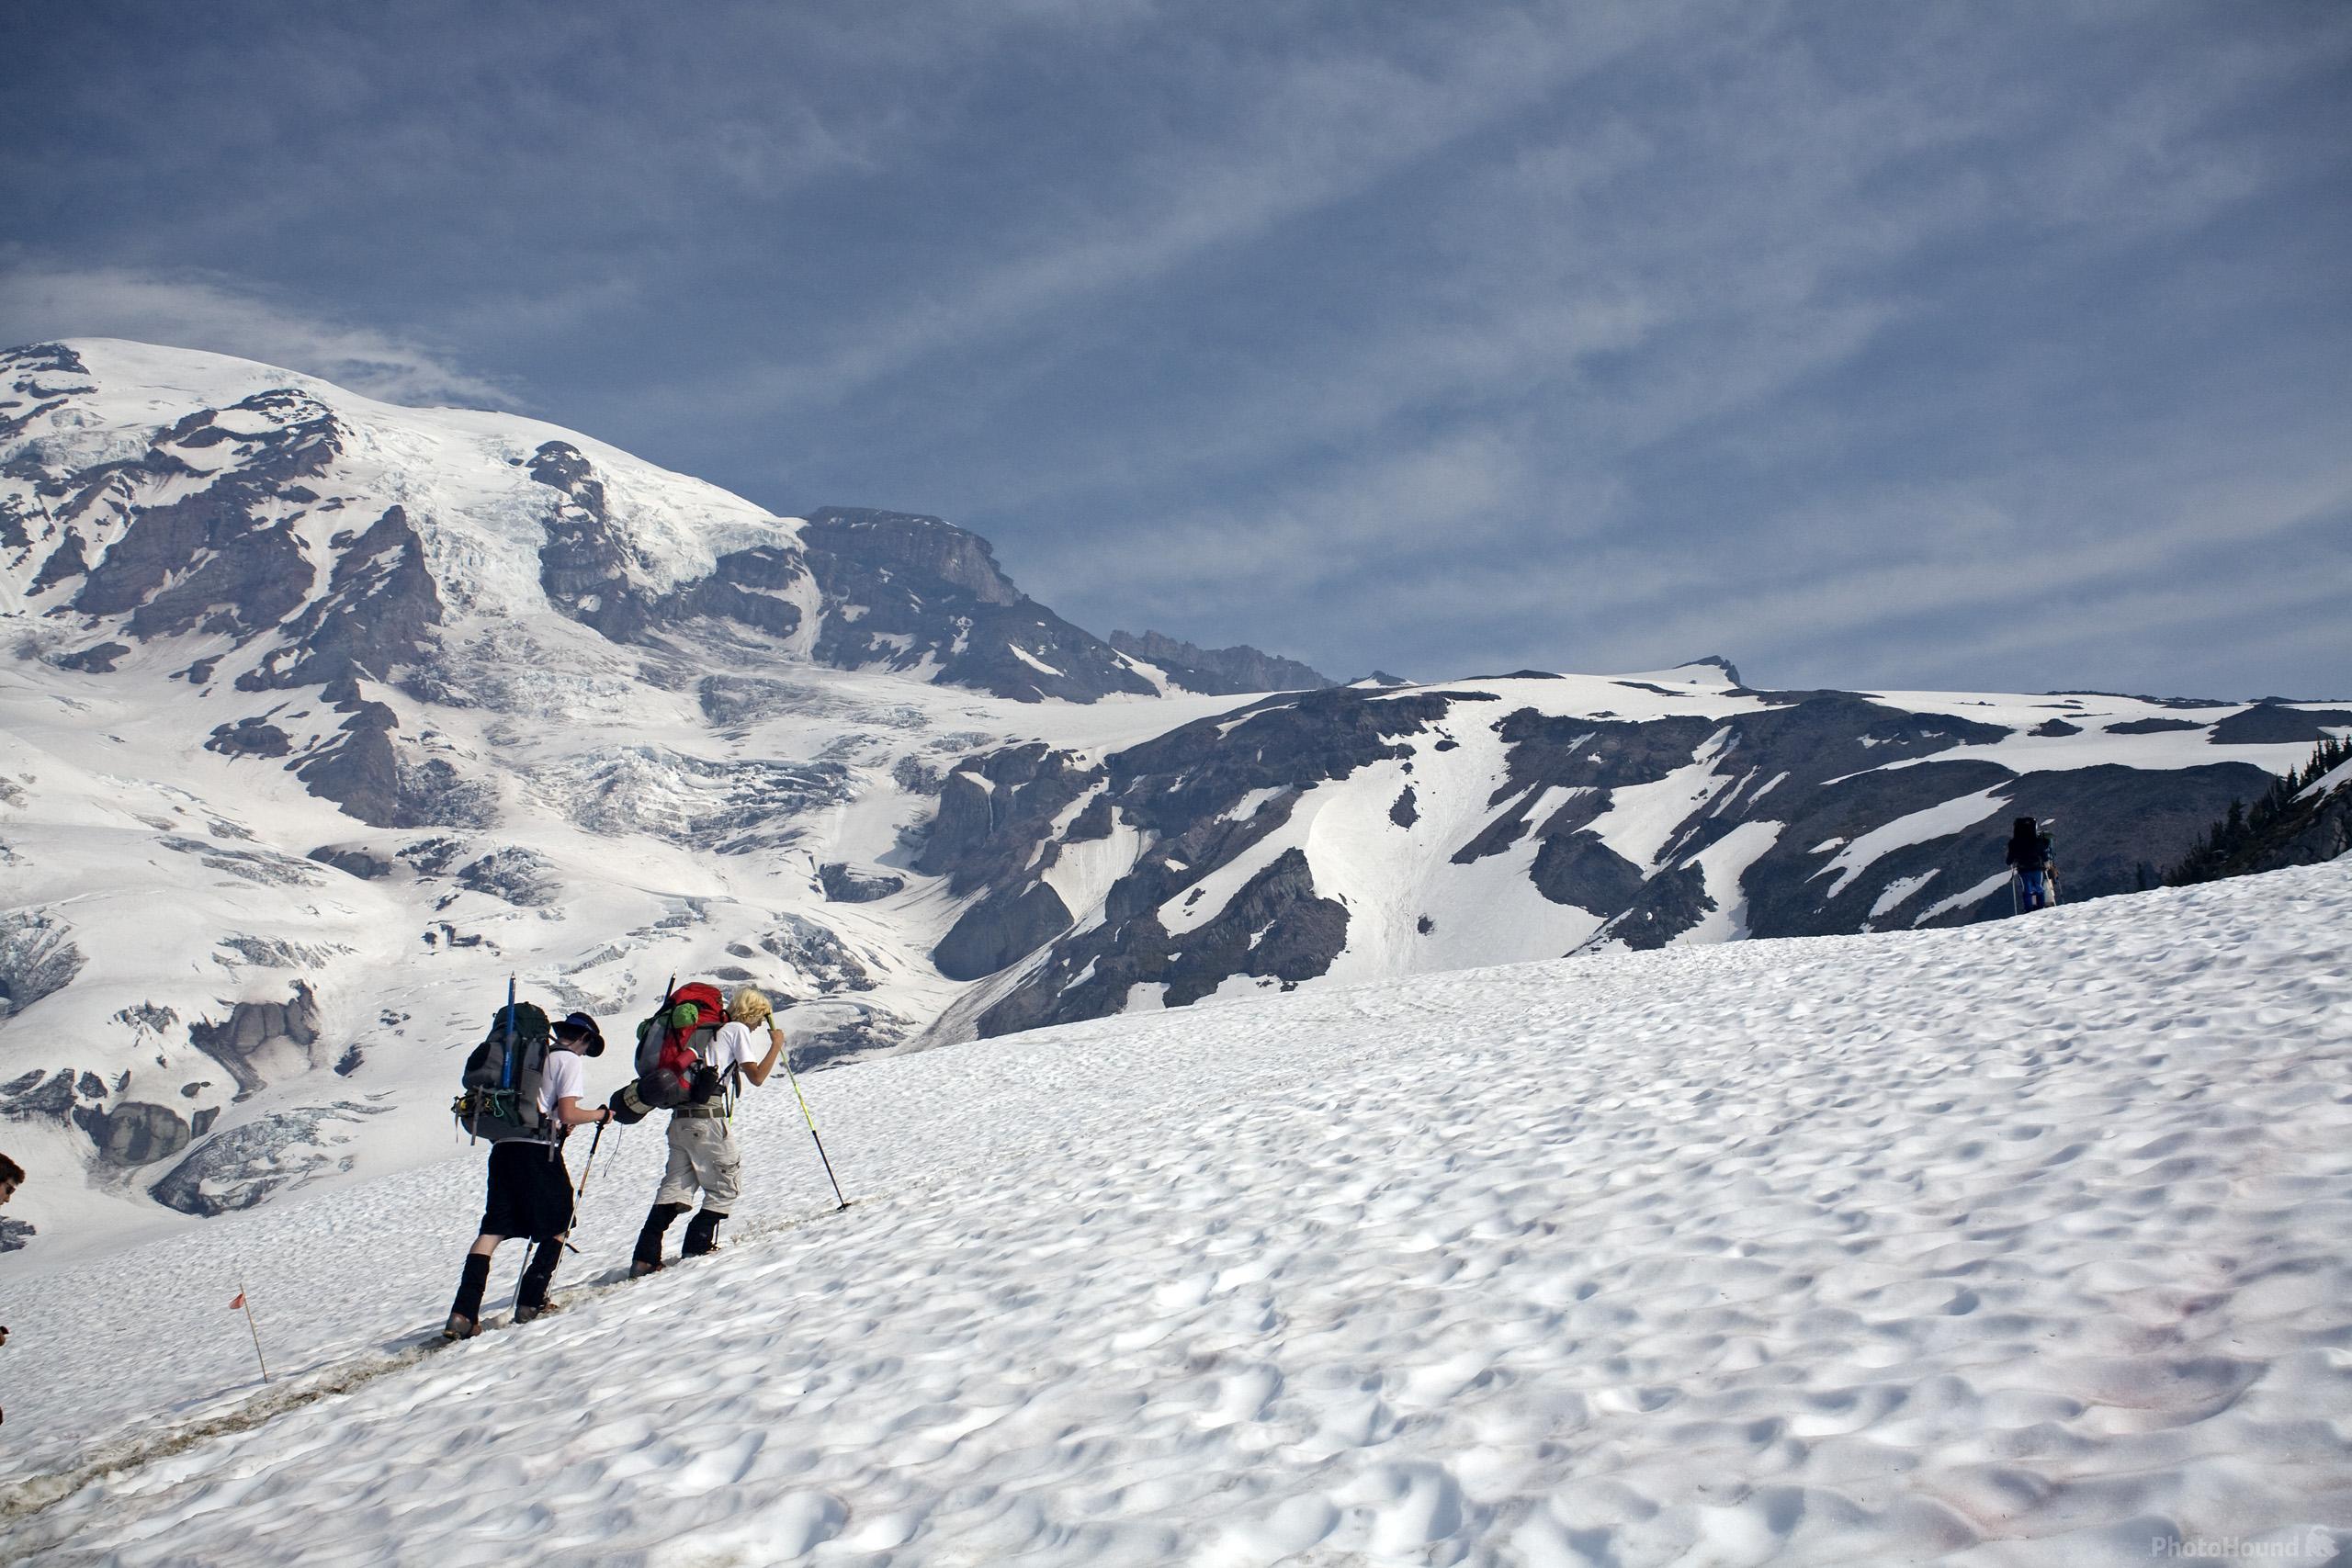 Image of Camp Muir, Mount Rainier National Park by T. Kirkendall and V. Spring